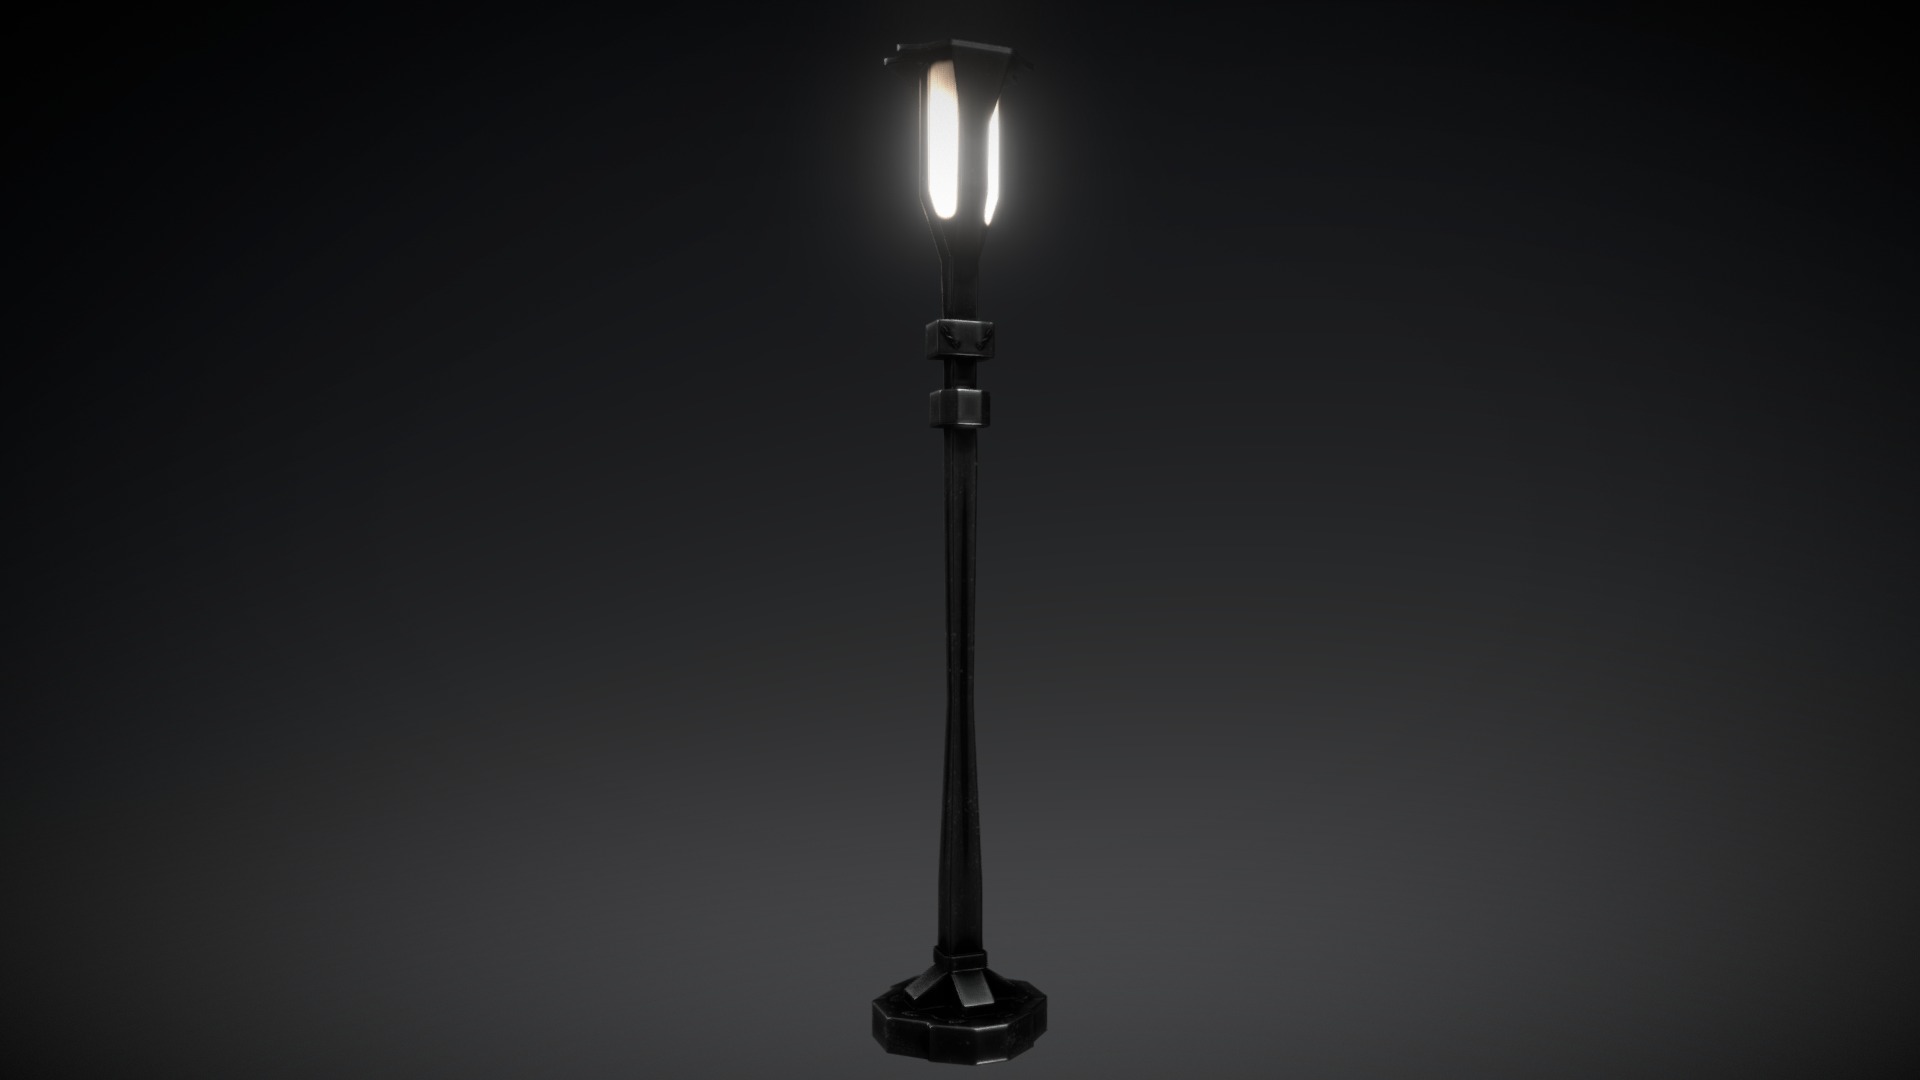 3D model Lamp / Street light - This is a 3D model of the Lamp / Street light. The 3D model is about a light post with a light on top.